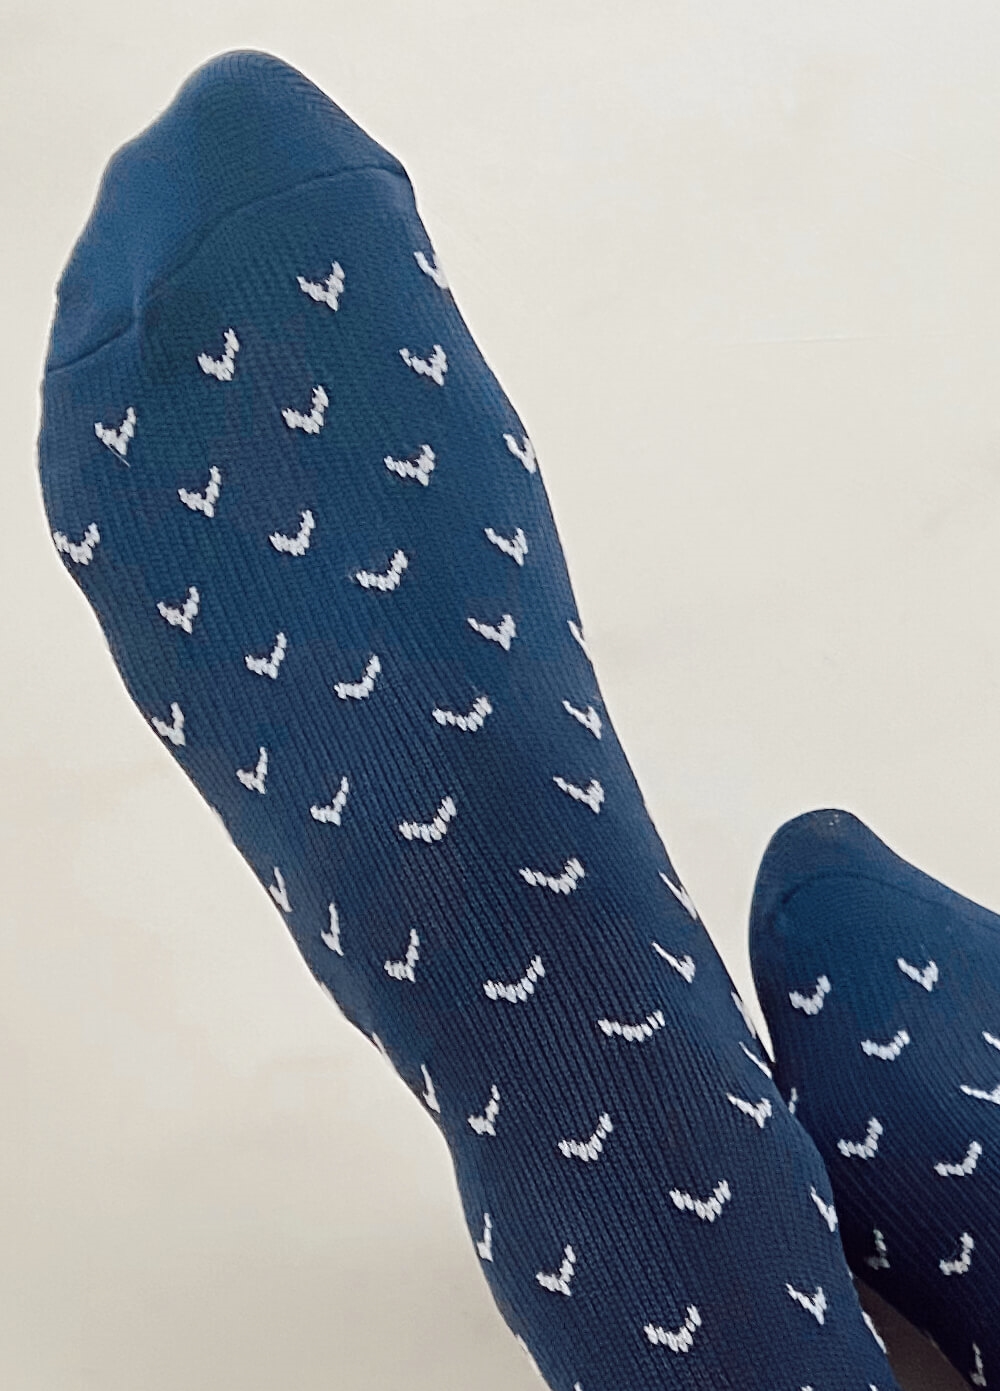 Mama Sox - Excite Maternity Compression Socks in Navy Arrow